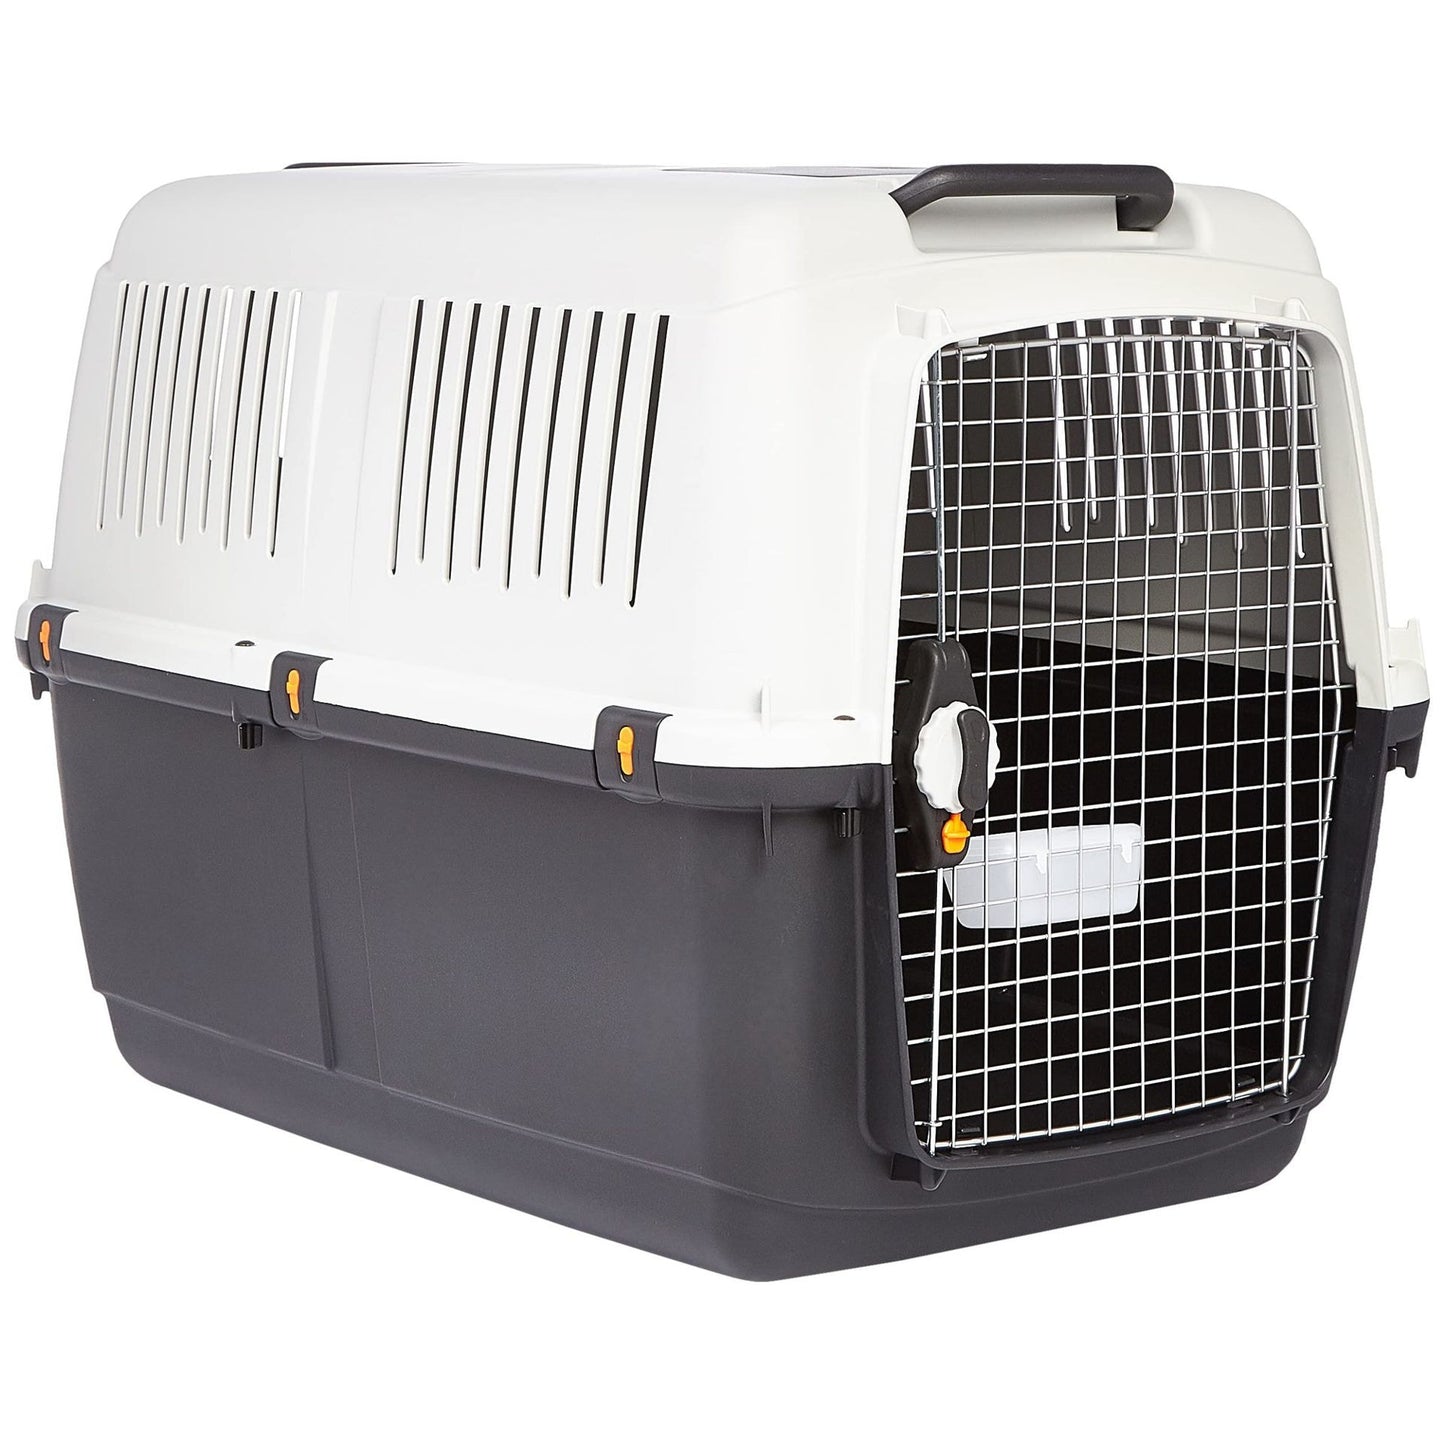 Mp Bergamo Durable Pets Carrier, Grey and Black - COOLBABY